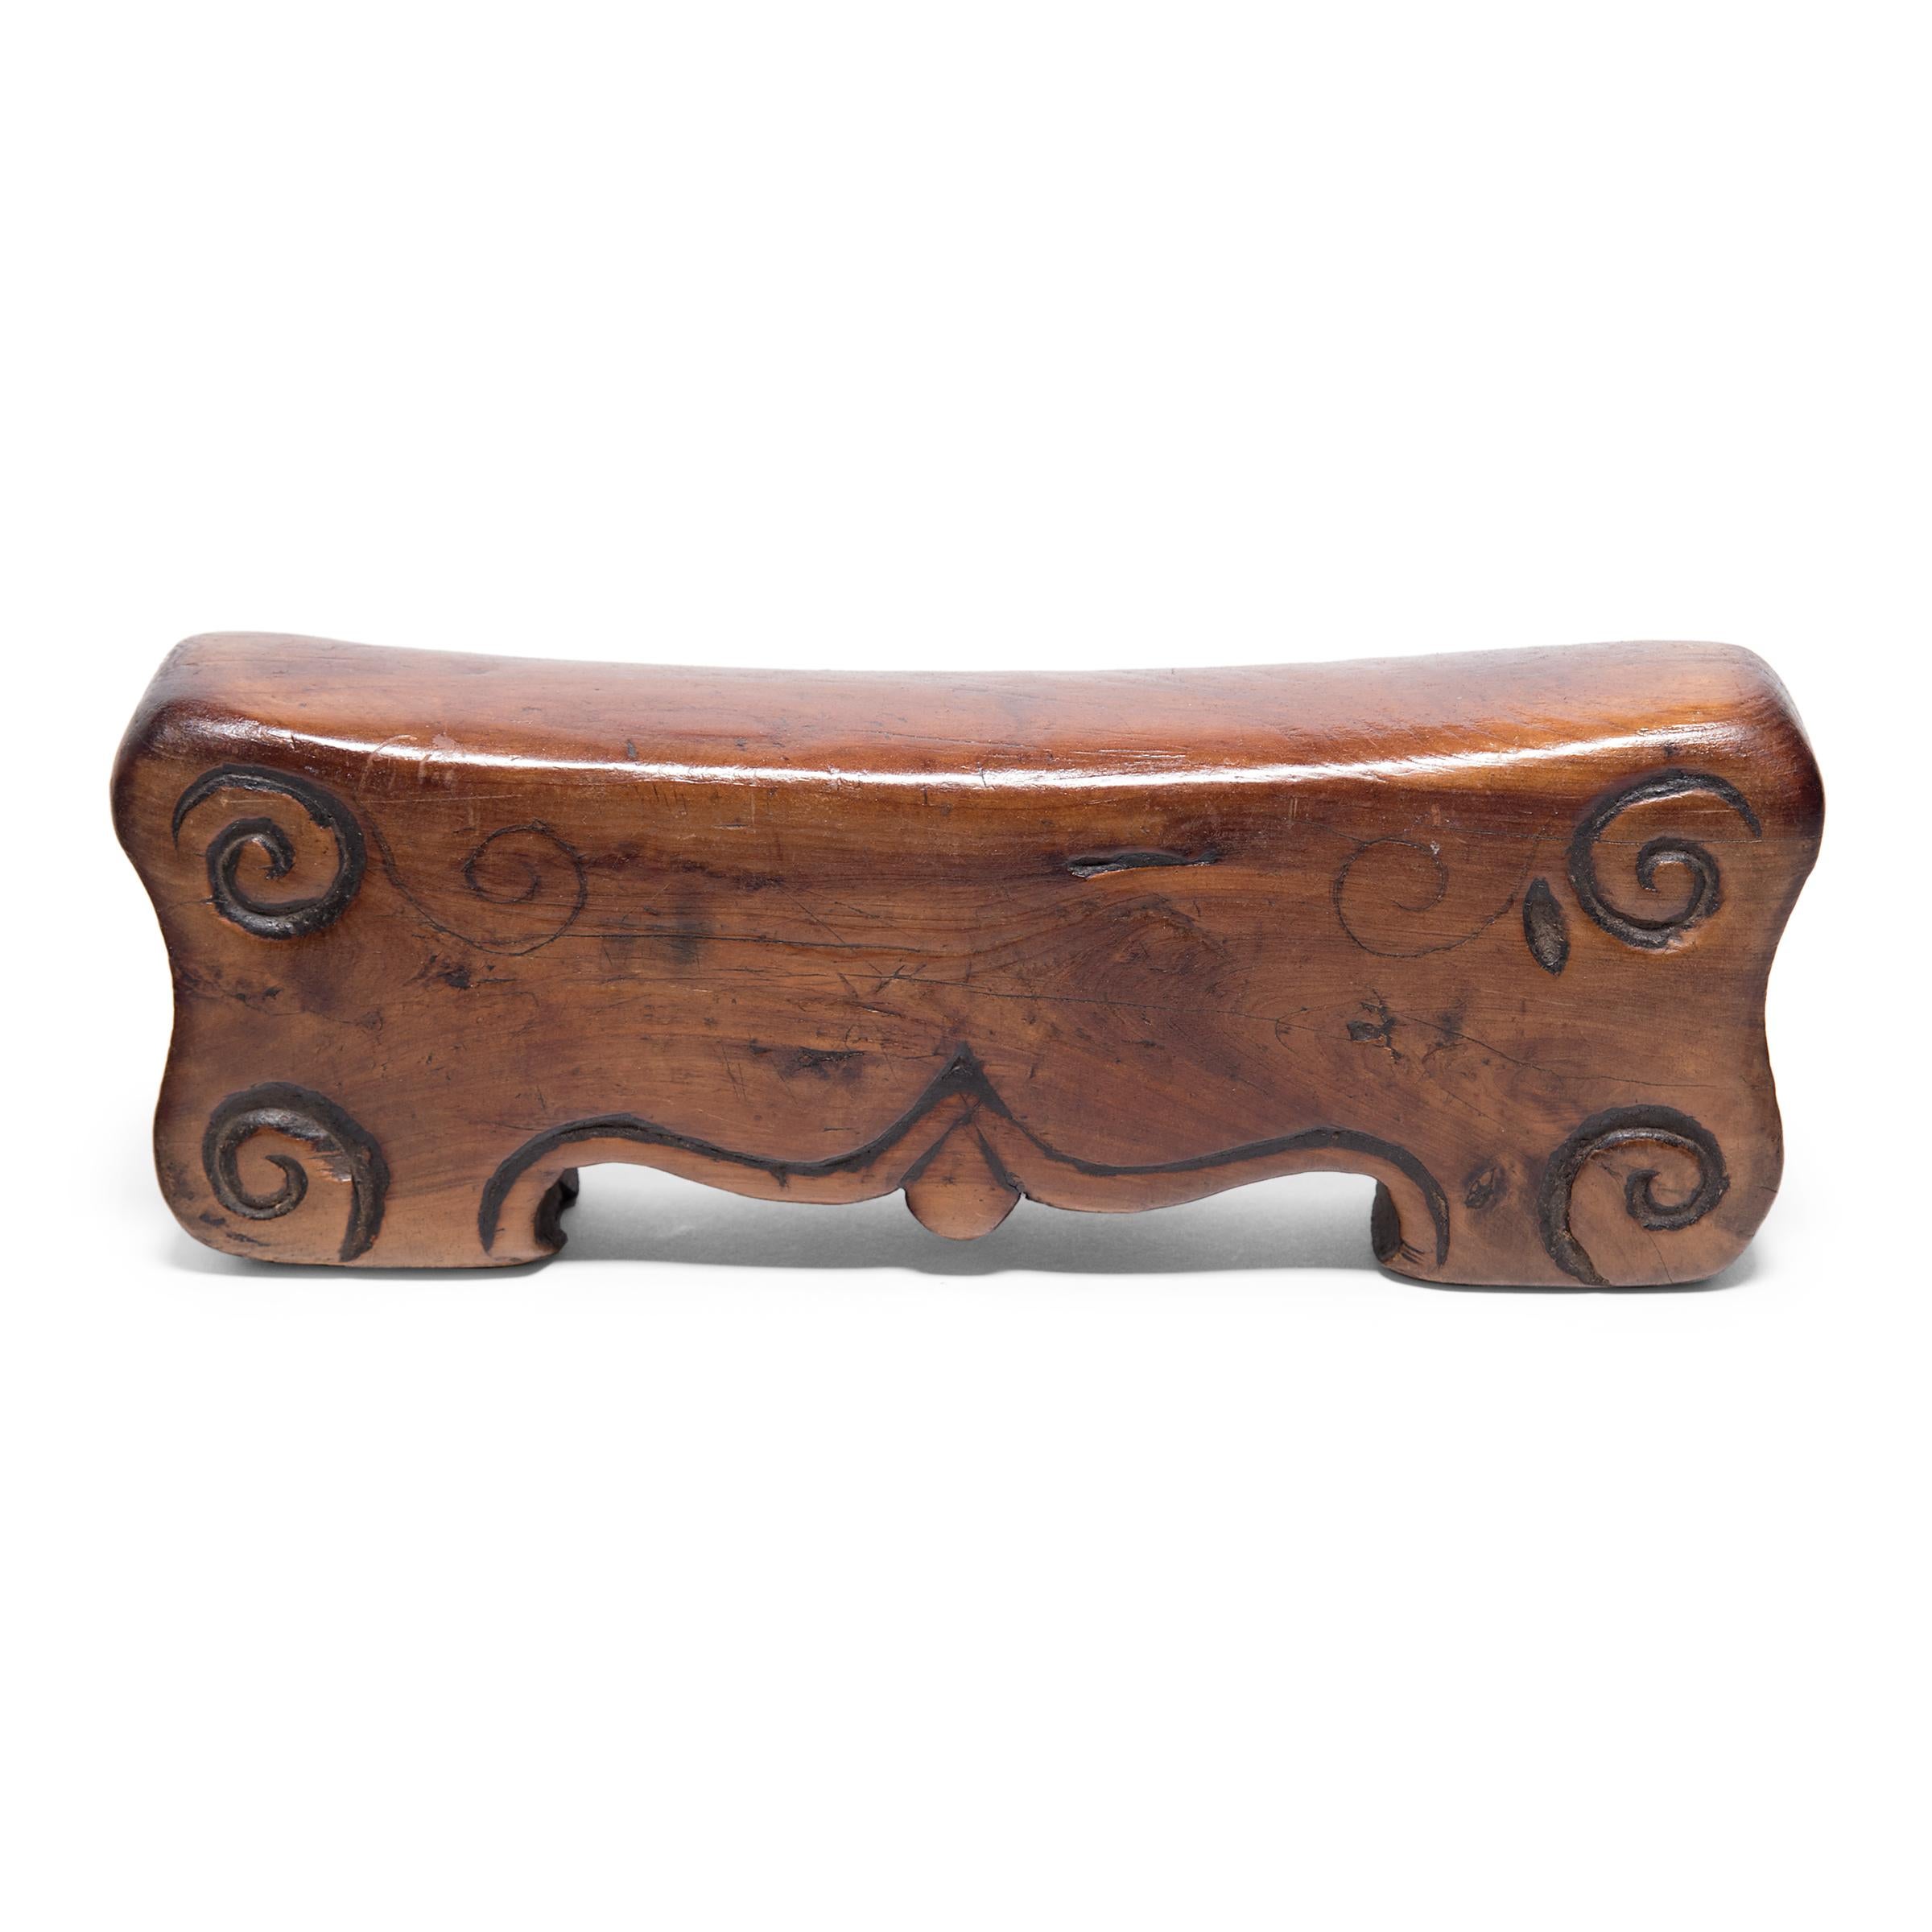 Qing Provincial Chinese Scrollwork Headrest, circa 1850